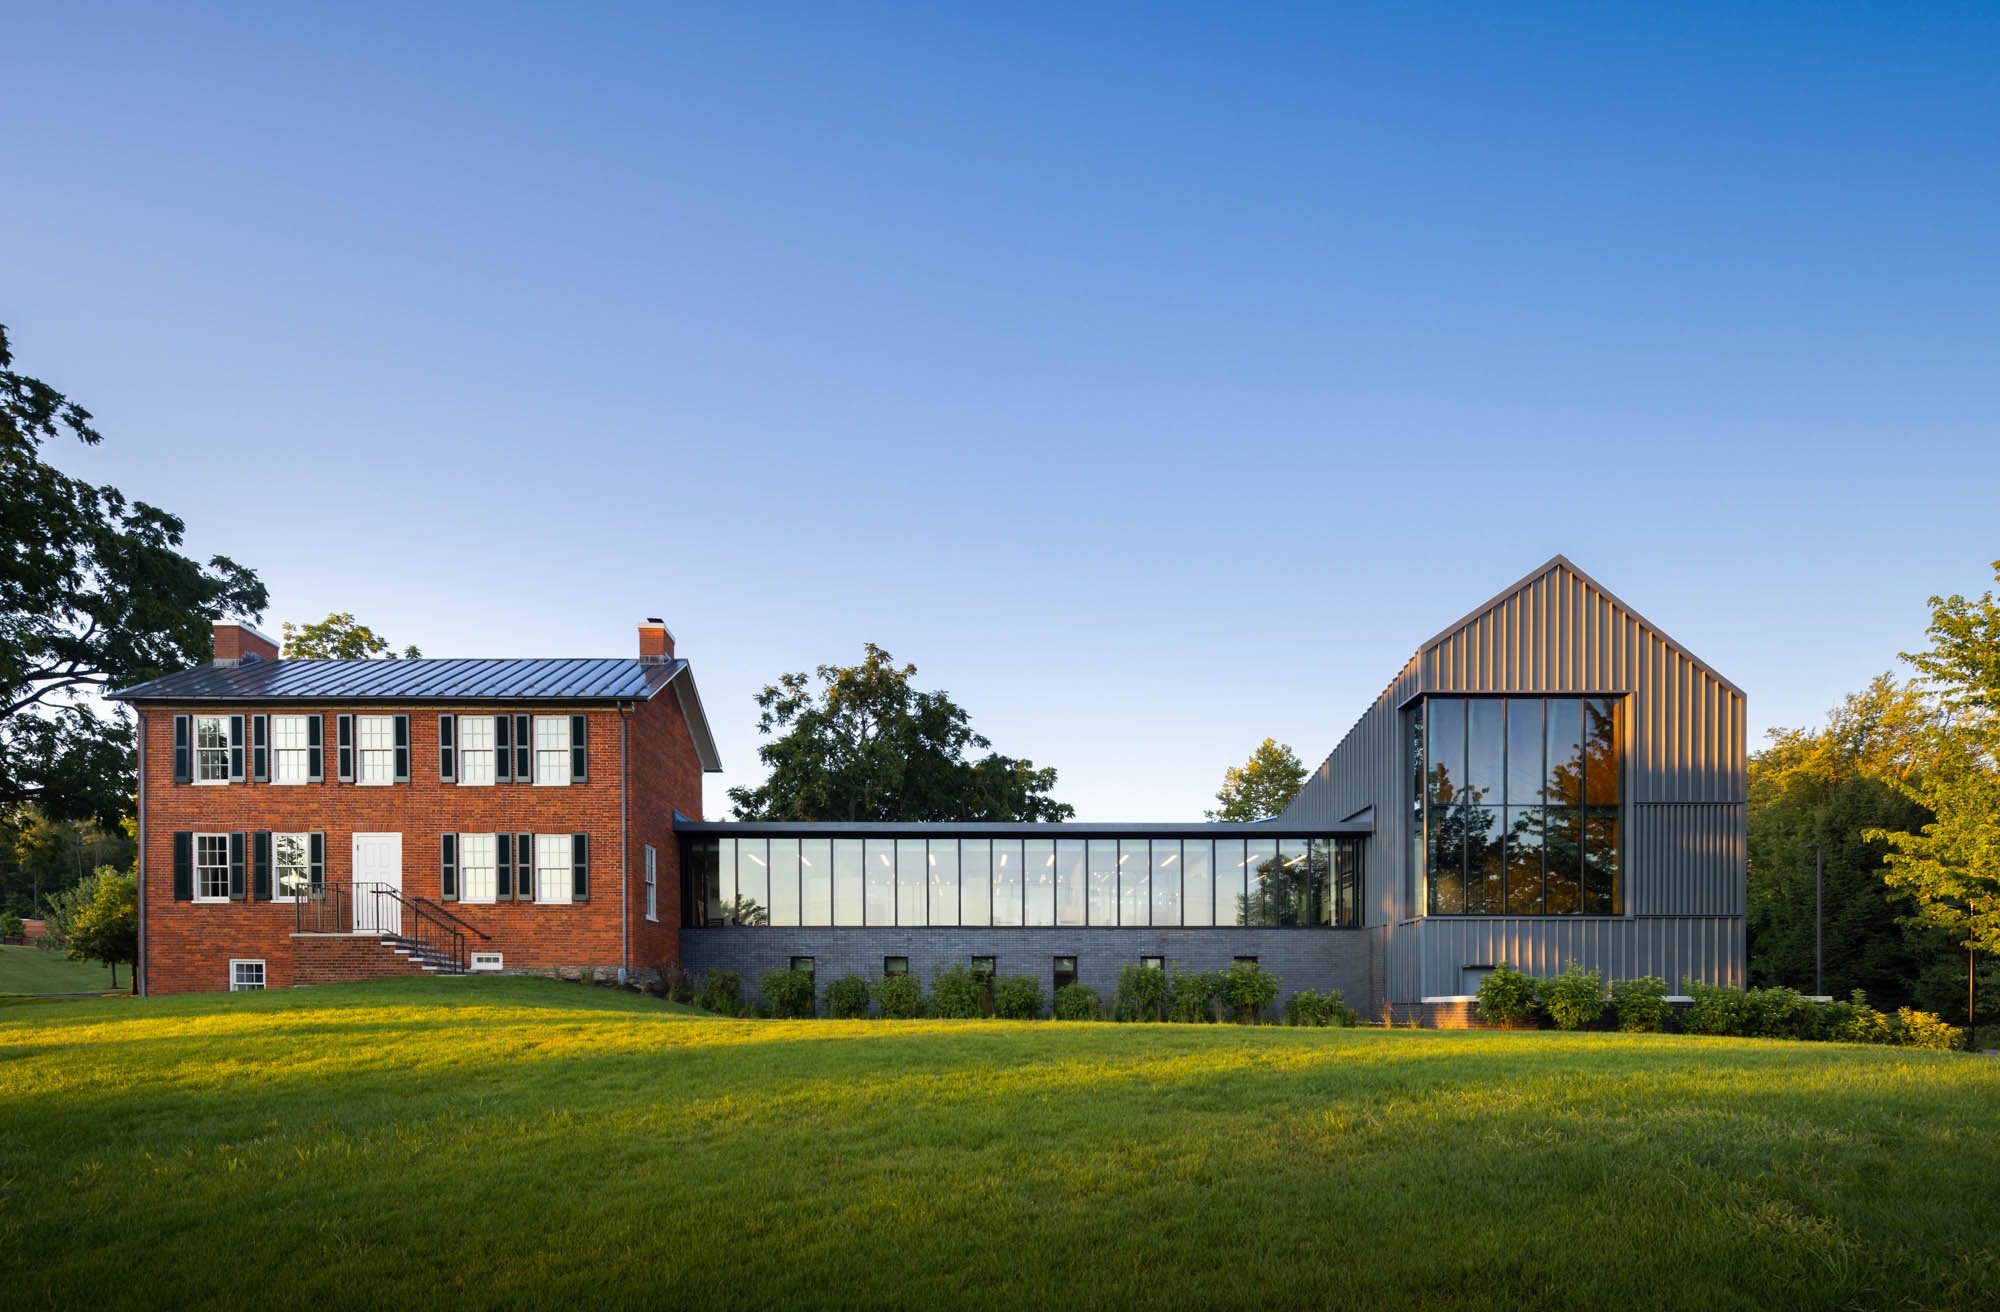 Renovation of Penn State Behrend's Federal House Wins Architectural Award